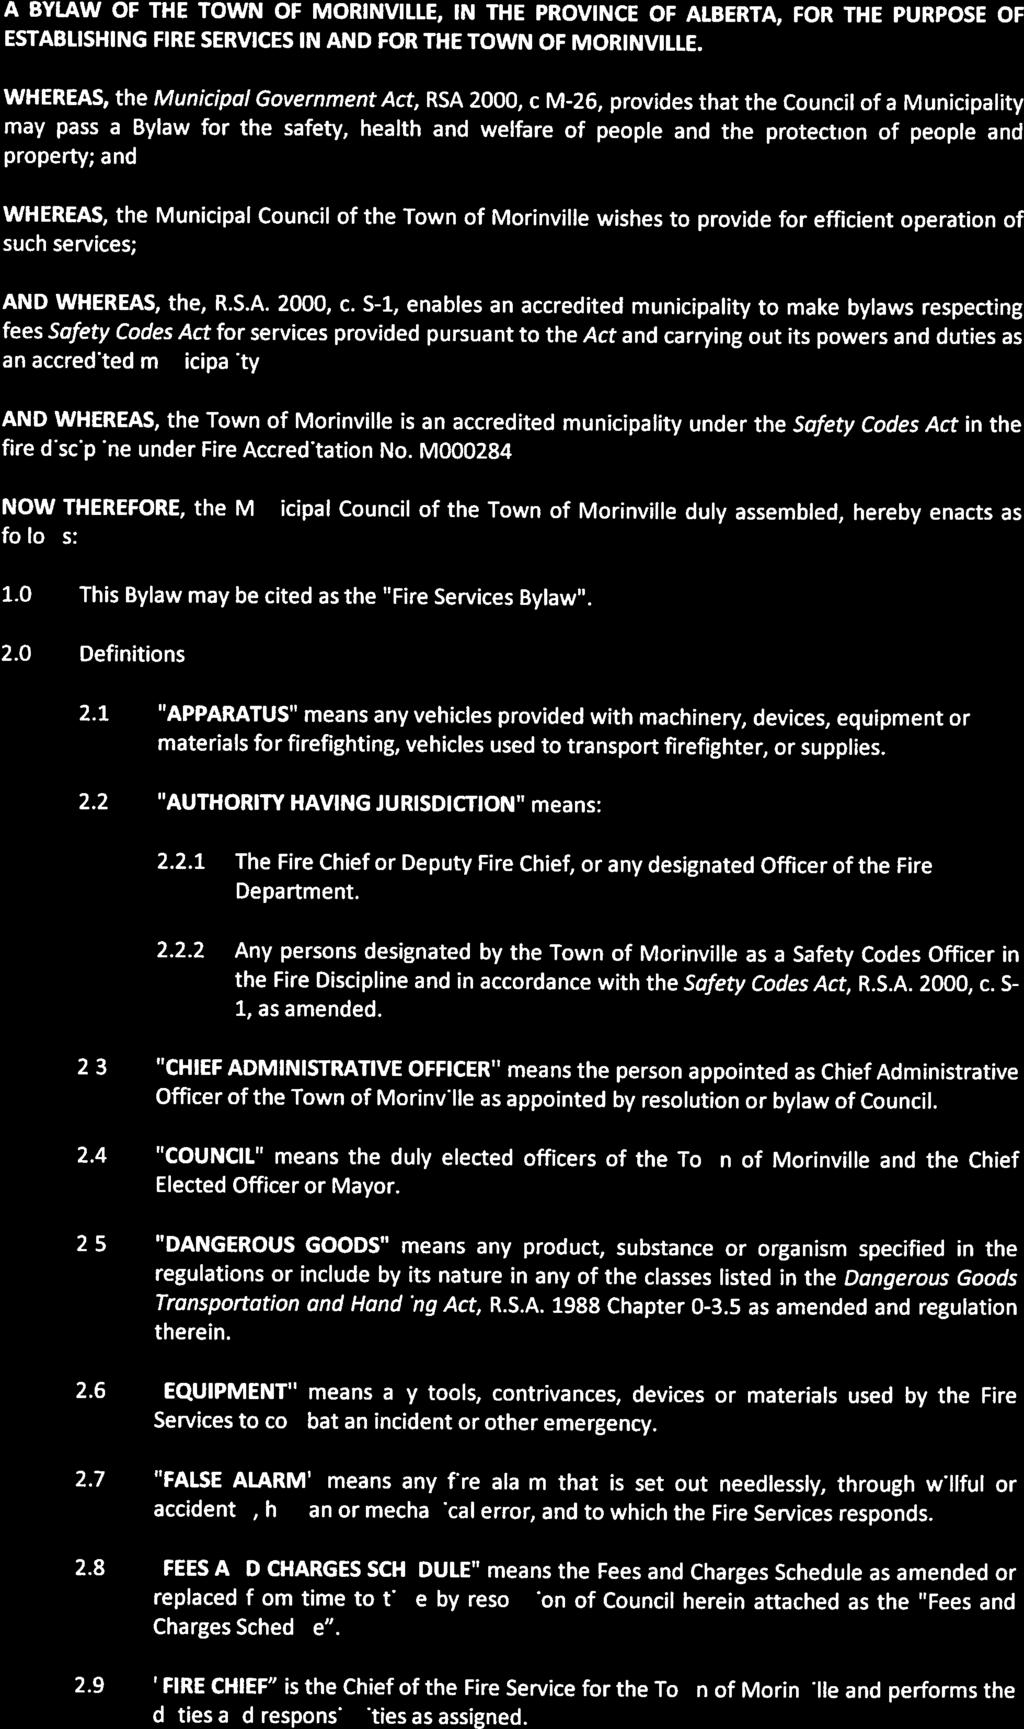 BYI.AW 14/215 A BYLAW OF THE TOWN OF MORINVILLE, IN THE, FOR THE PURPOSE OF ESTABLISHING FIRE SERVICES IN AND FOR THE TOWN OF MORINVILLE.